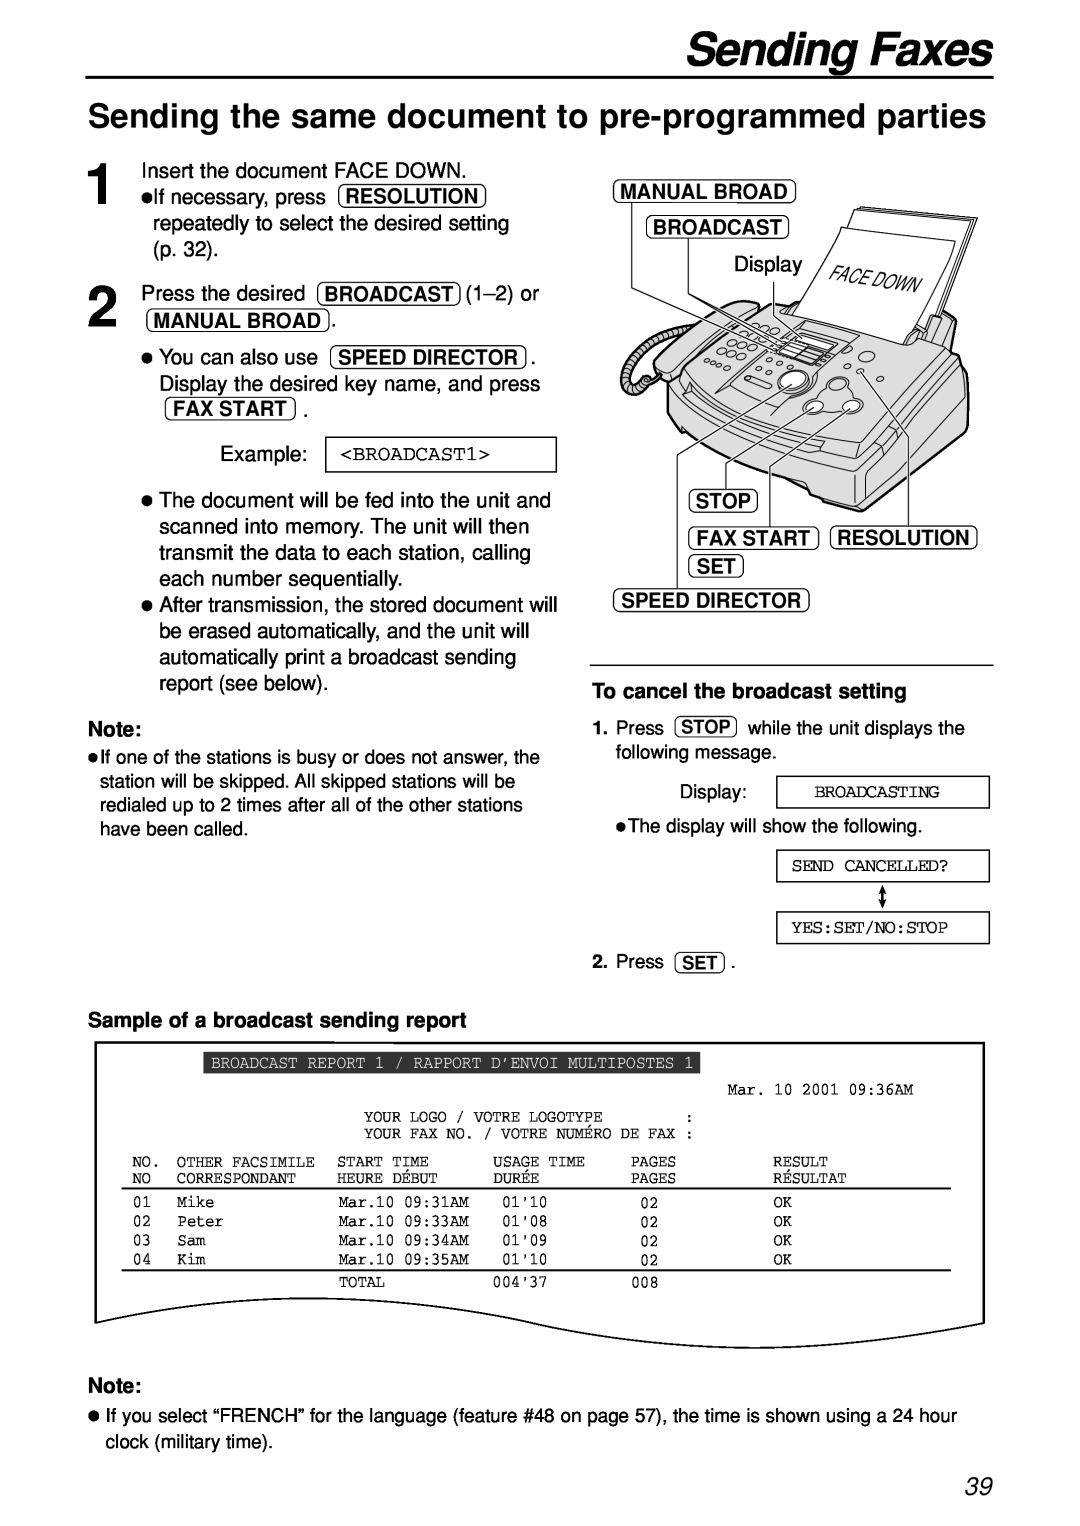 Panasonic KX-FL501C manual Sending the same document to pre-programmed parties, Sending Faxes, Example BROADCAST1 